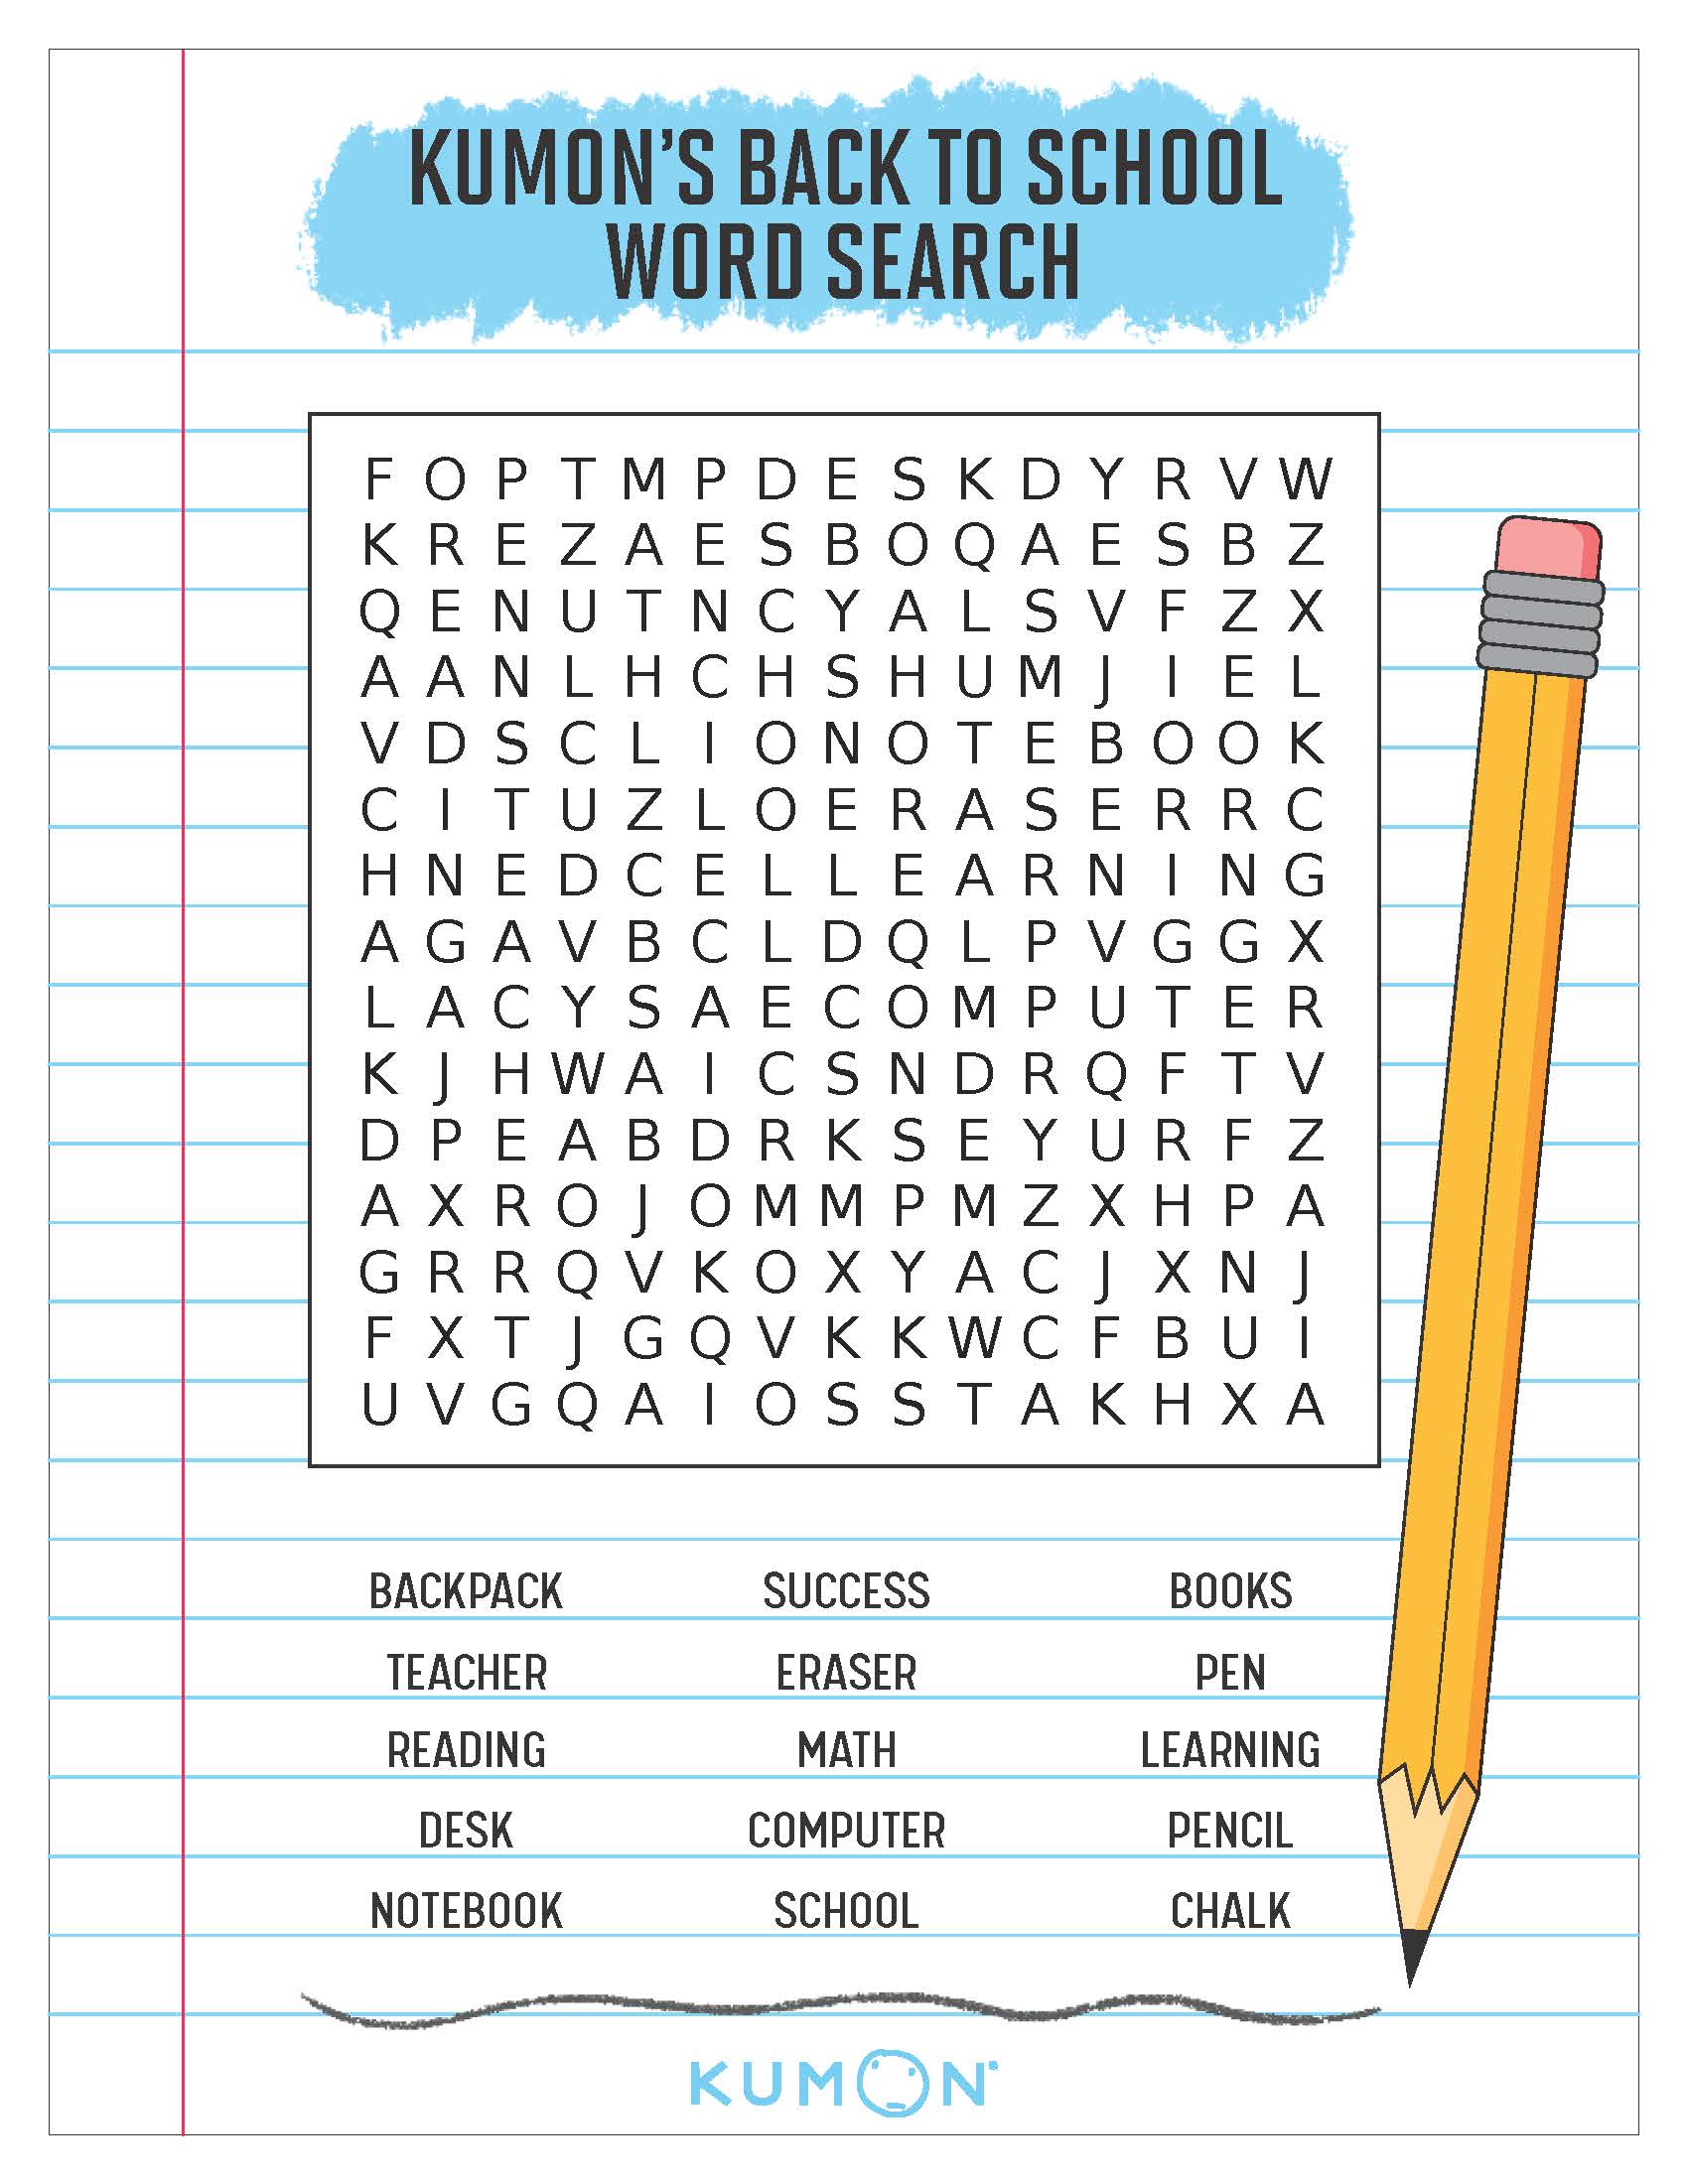 kumon-s-back-to-school-word-search-student-resources